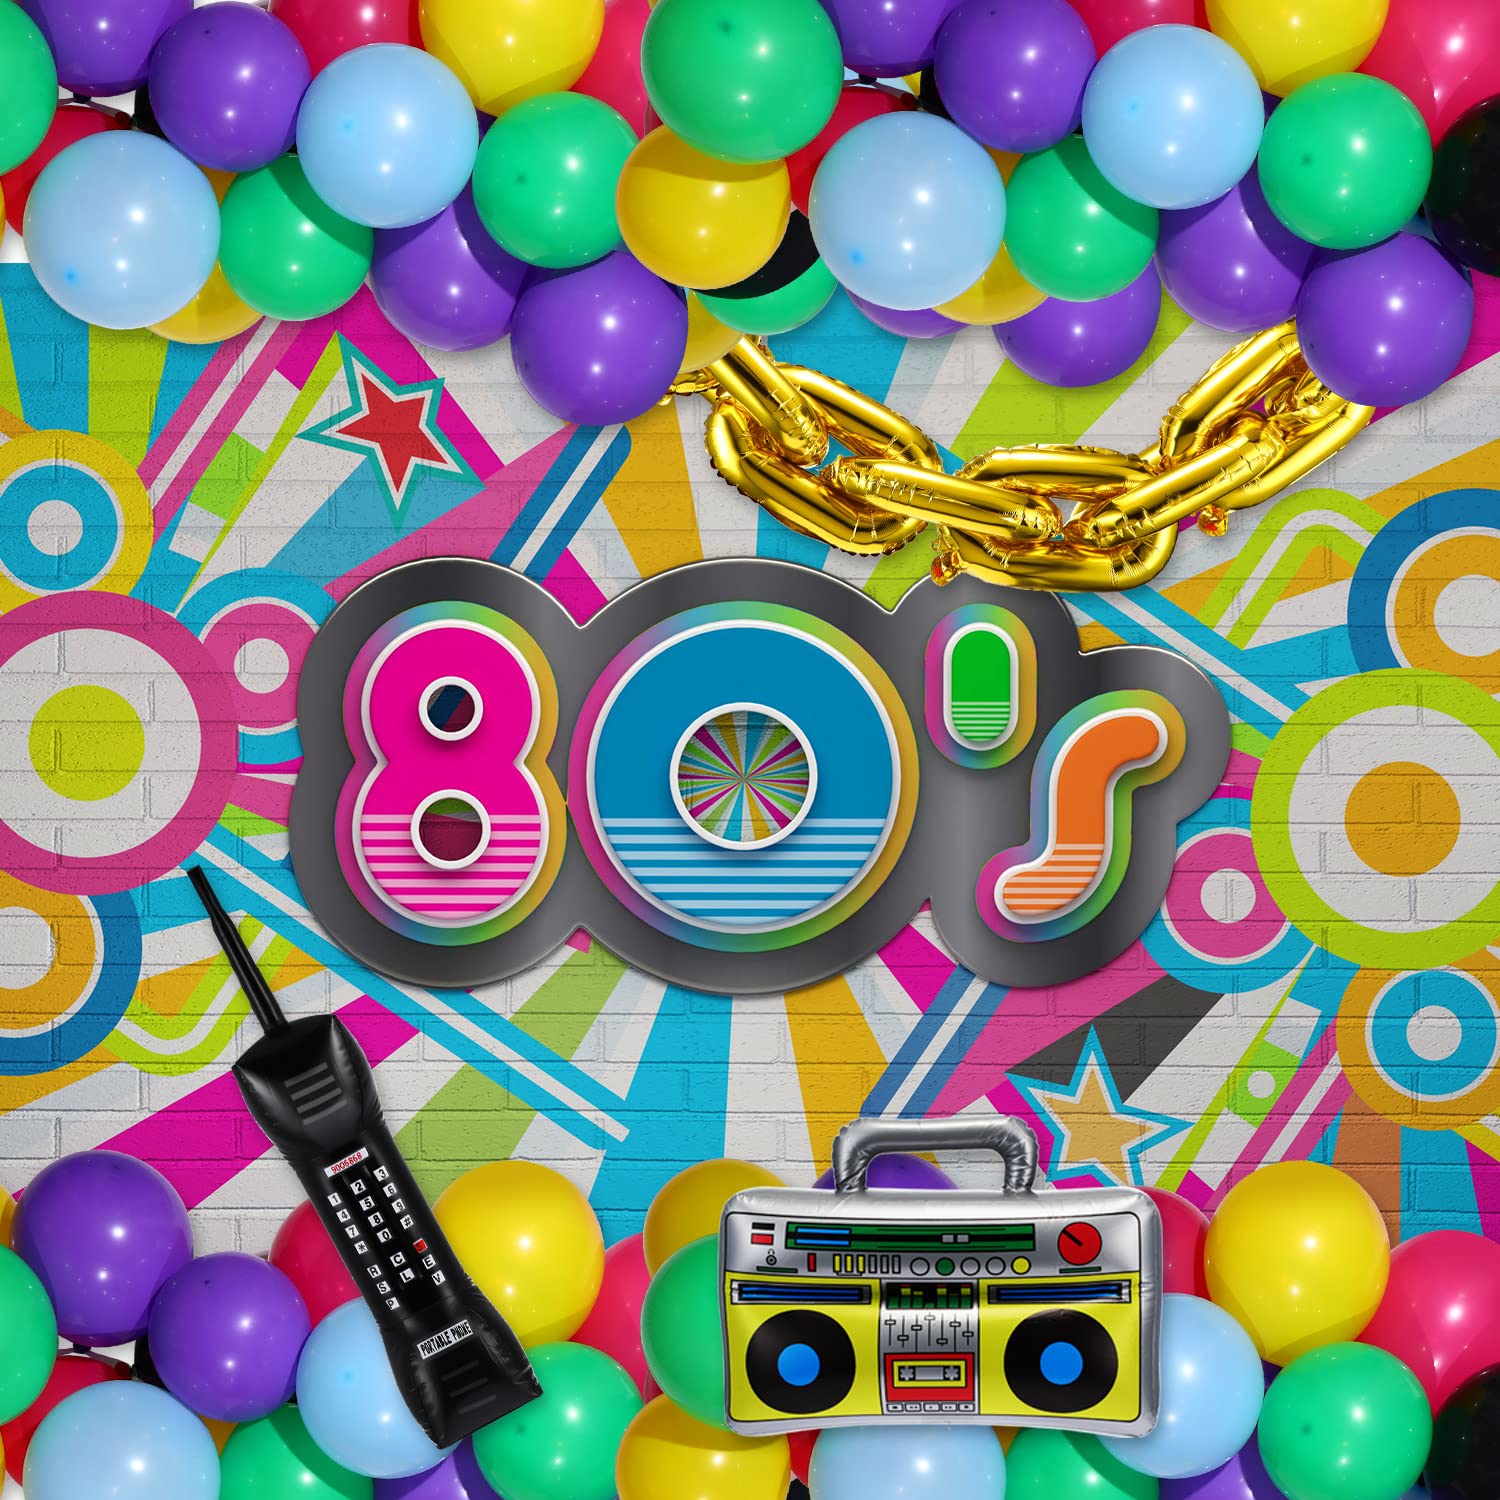 Great Choice Products 90S 80S Theme Party Balloons Backdrop Decorations Inlcude Inflatable Boom Box Inflatable Retro Mobile Phone Gold Chain Balloo…